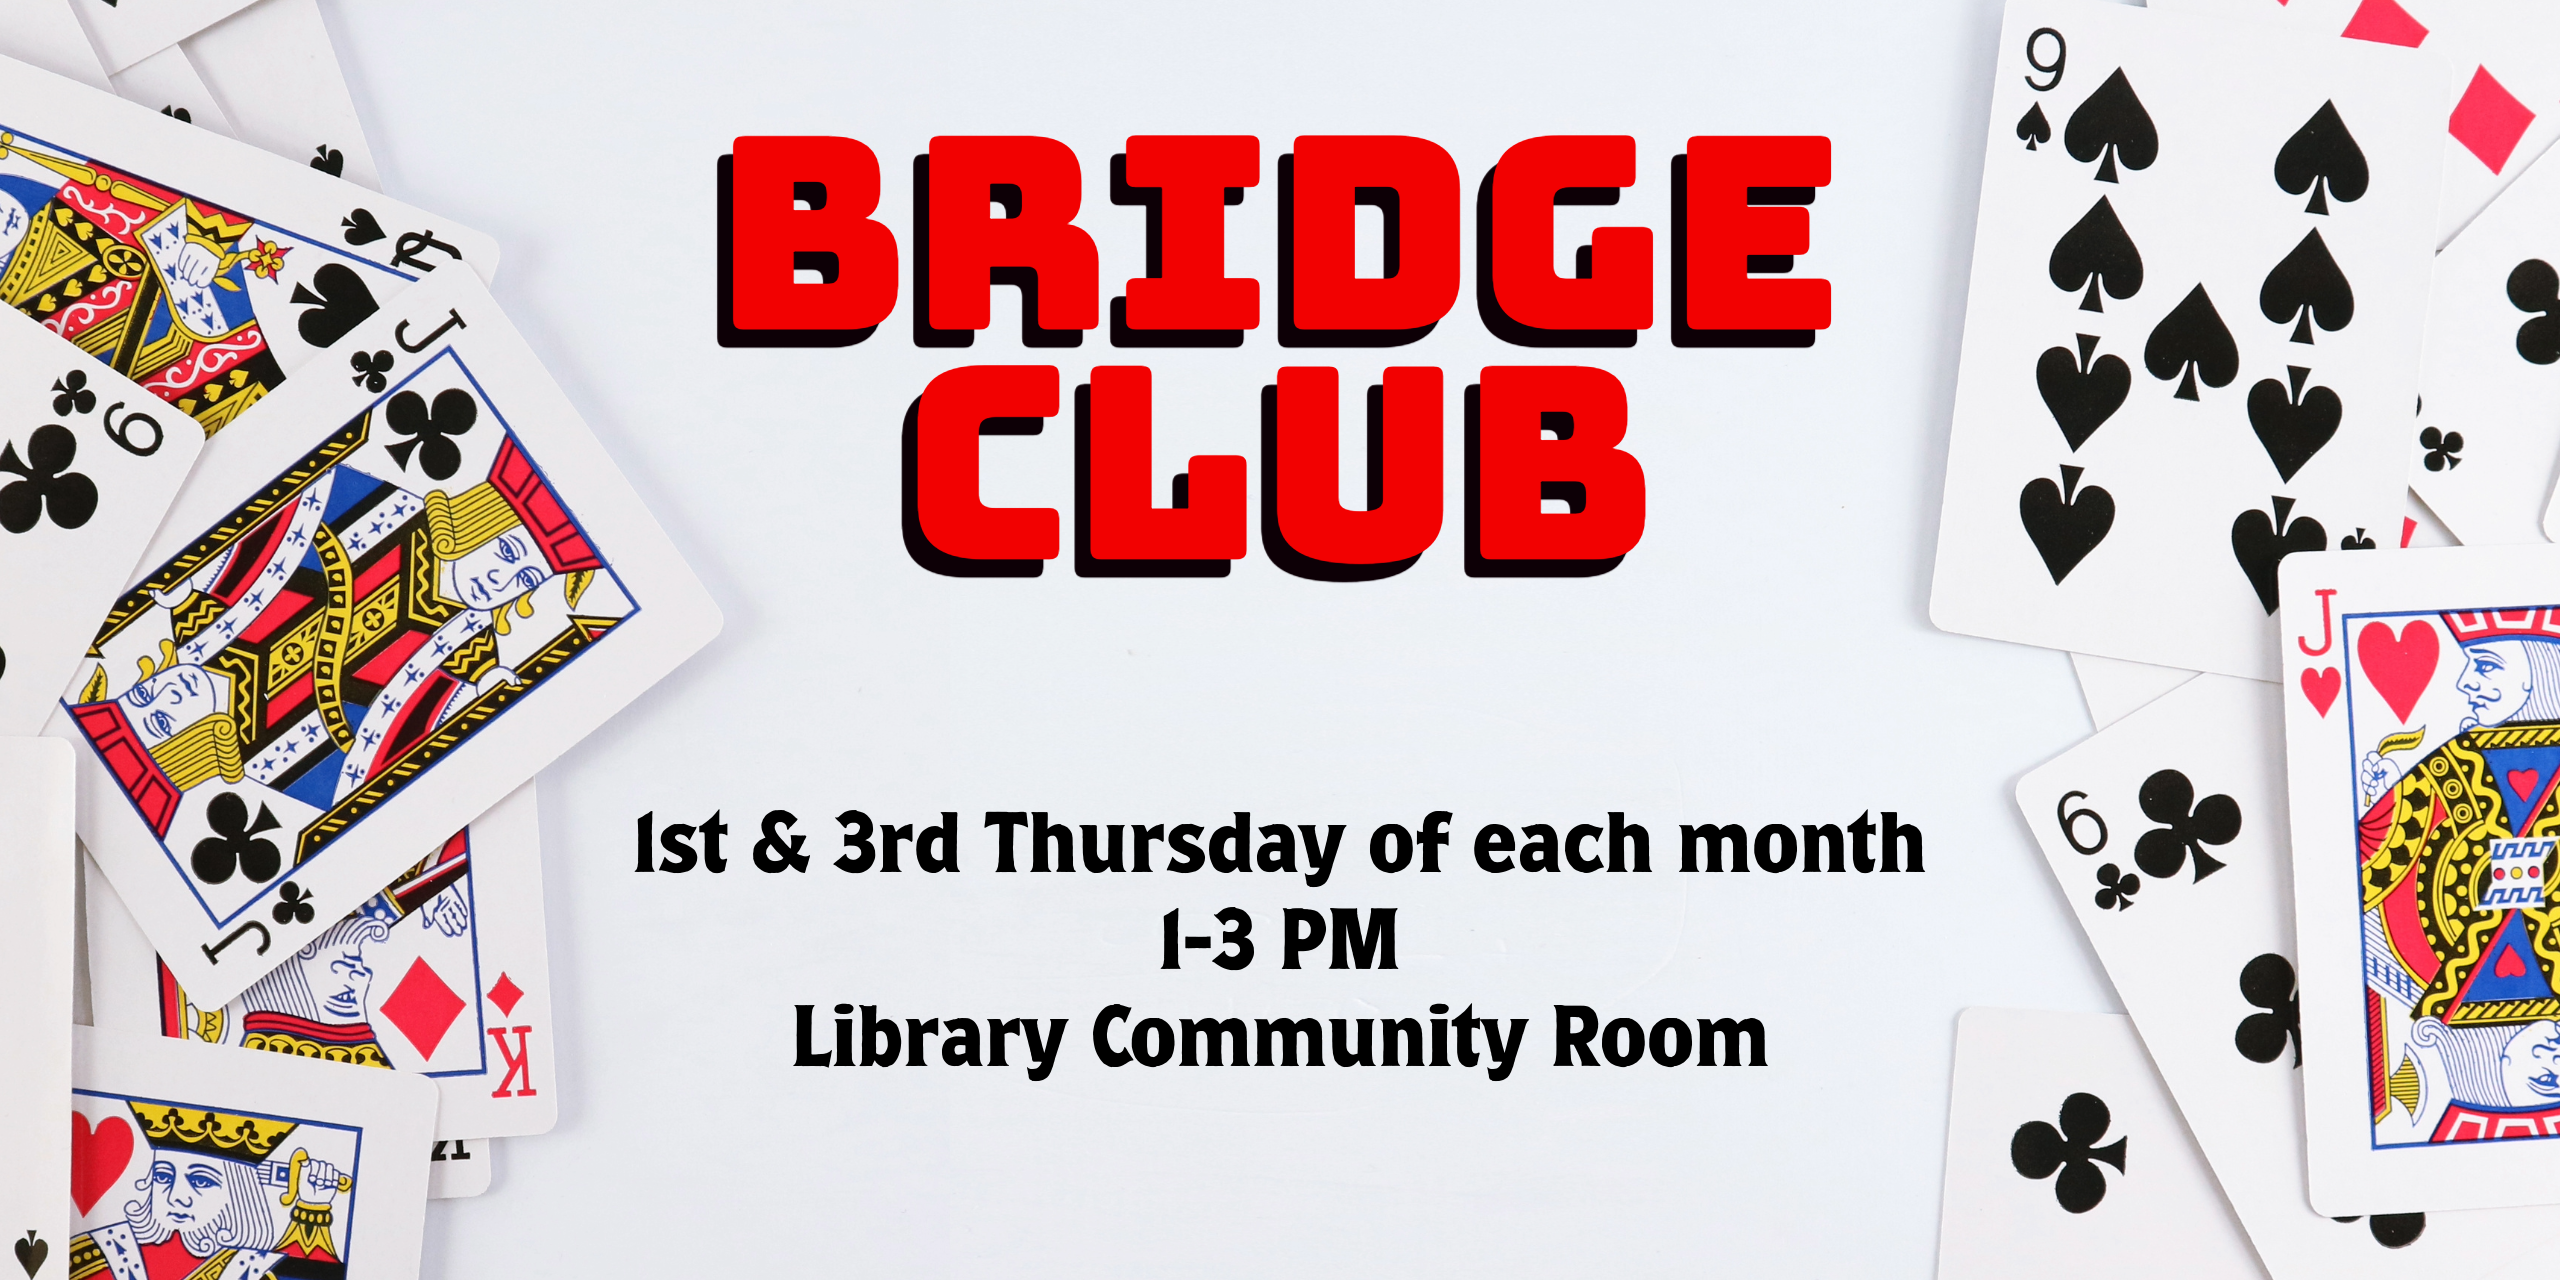 Bridge Club takes place on the 1st and 3rd Thursdays of each month from 1-3 PM.  It's in the Library Community Room.